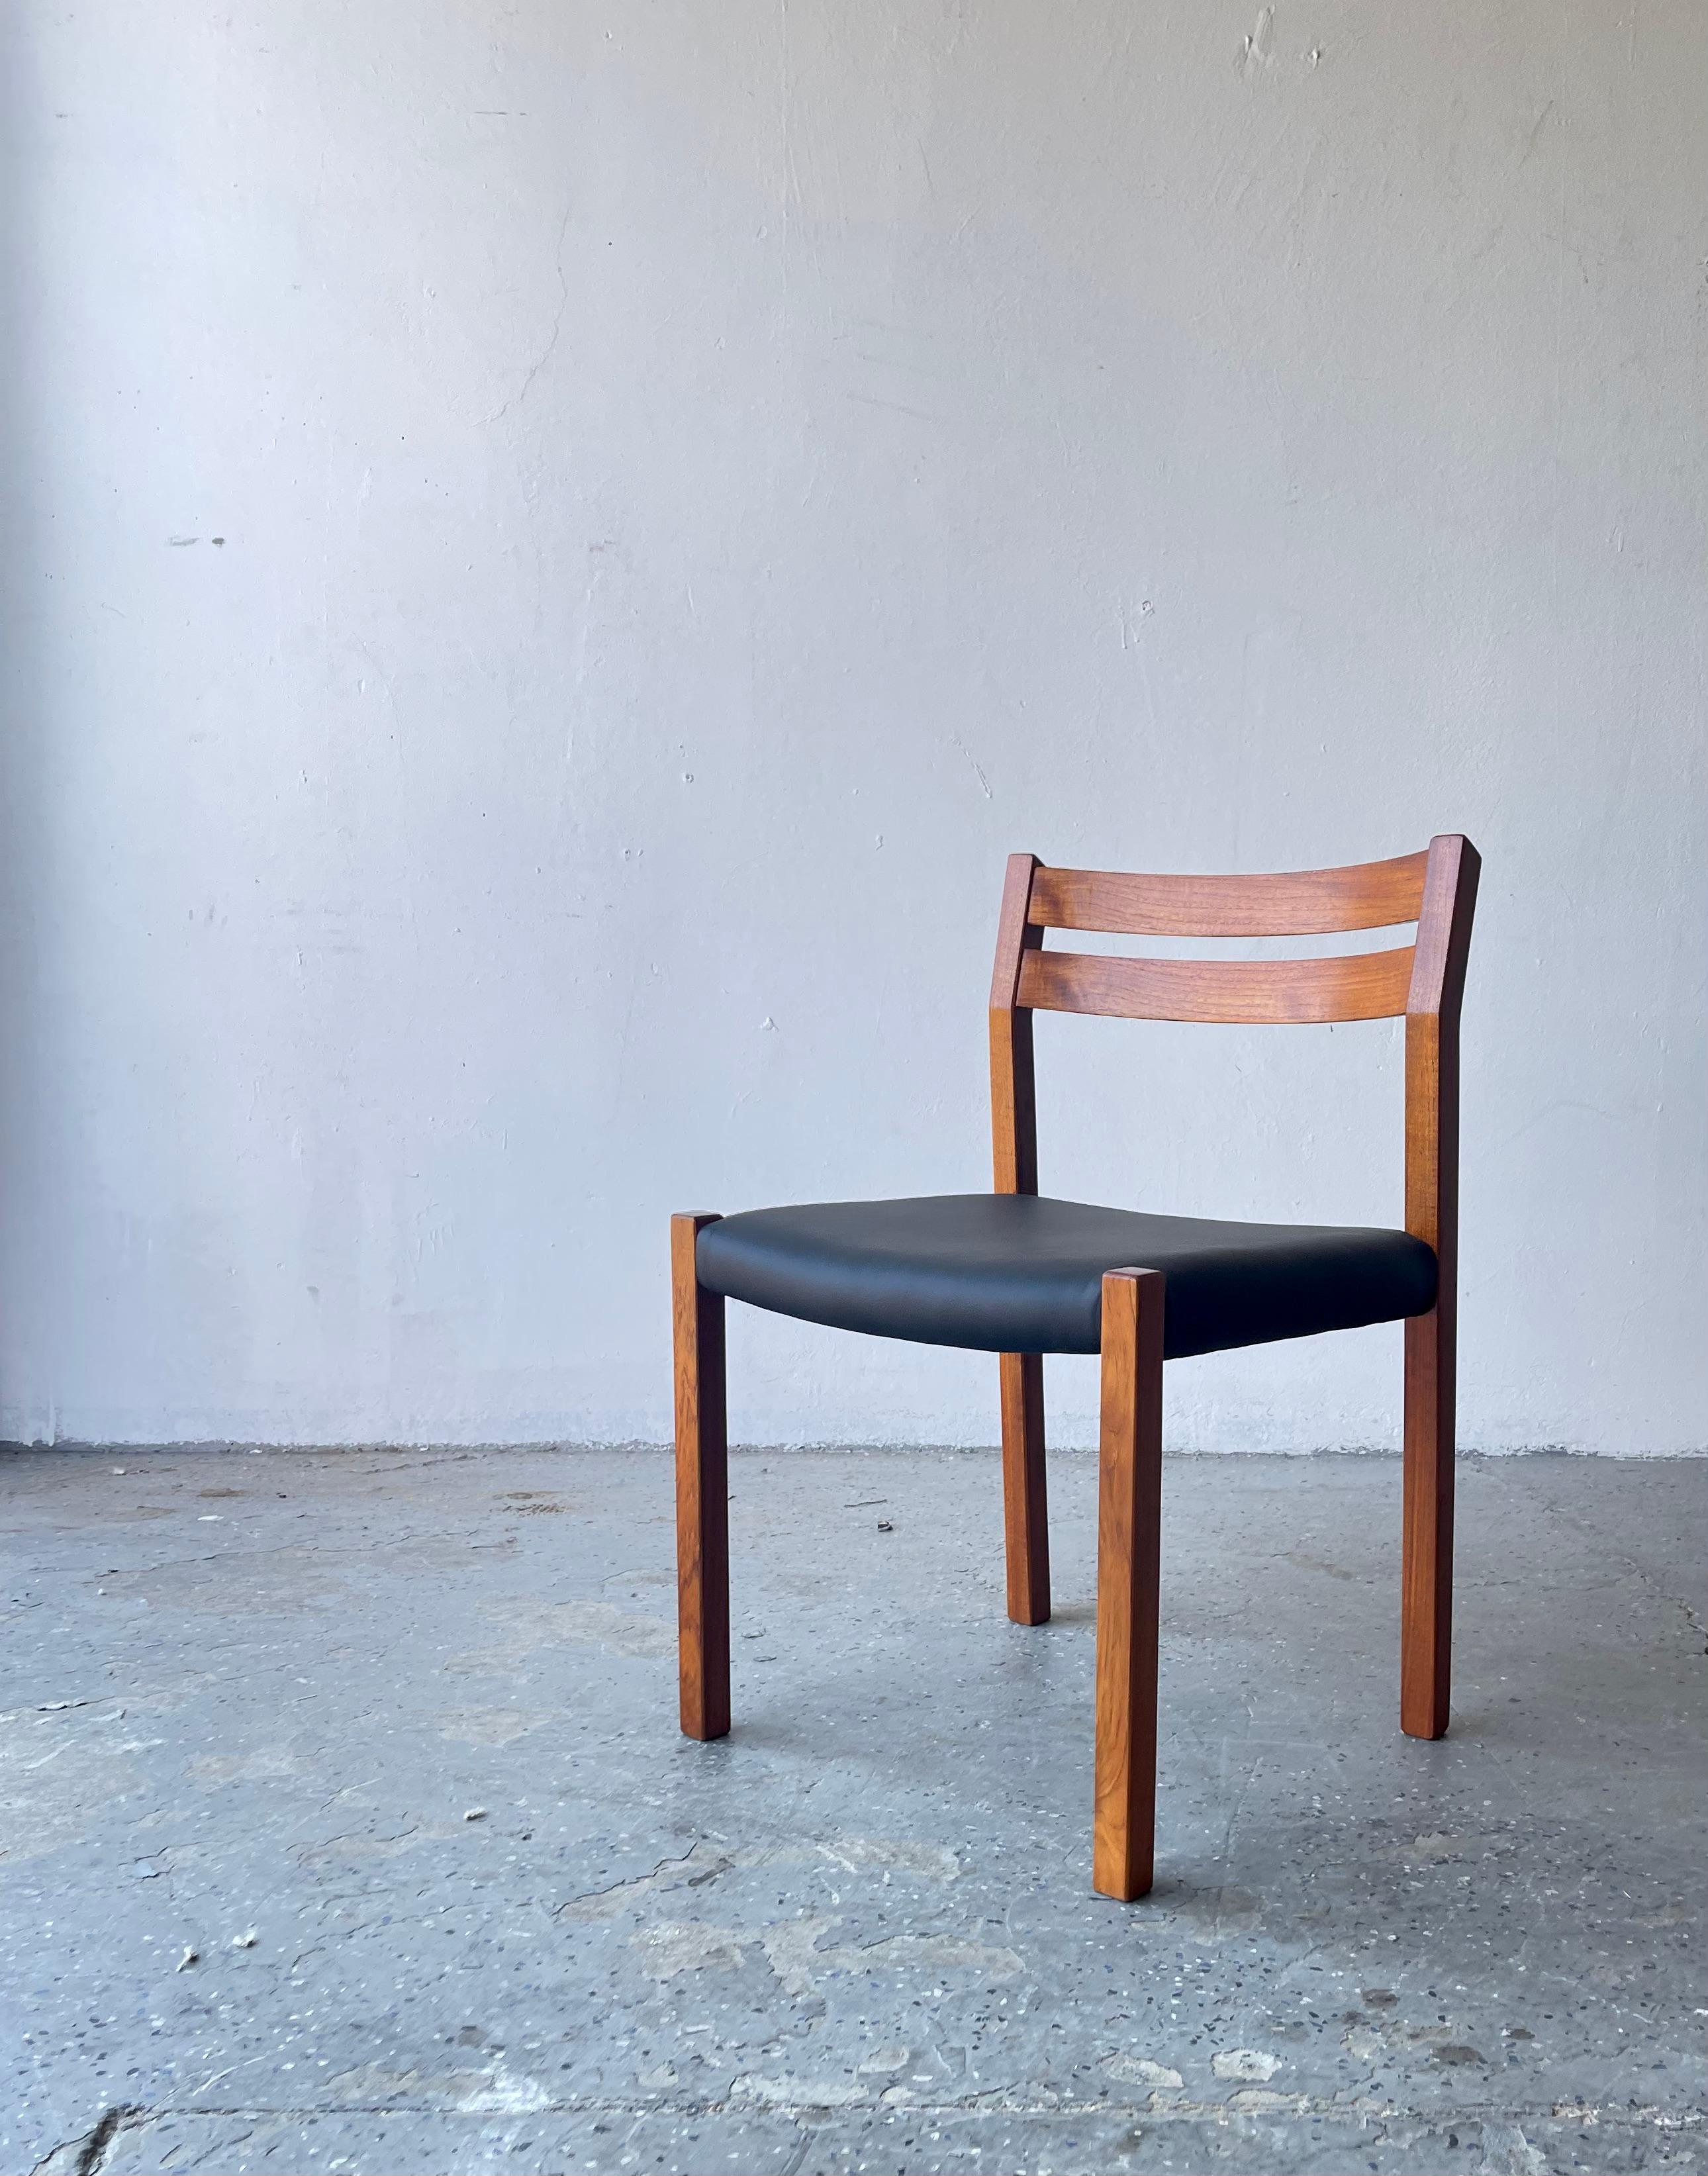 This set of 4 J.L Moller Model 401 dining chairs was designed in 1974 by Jorgen Henrik Moller for J.L Moller Moblefabrik of Denmark. Generously proportioned seats and solid teak frames. A gorgeous set of elegant design. Meticulously restored to like